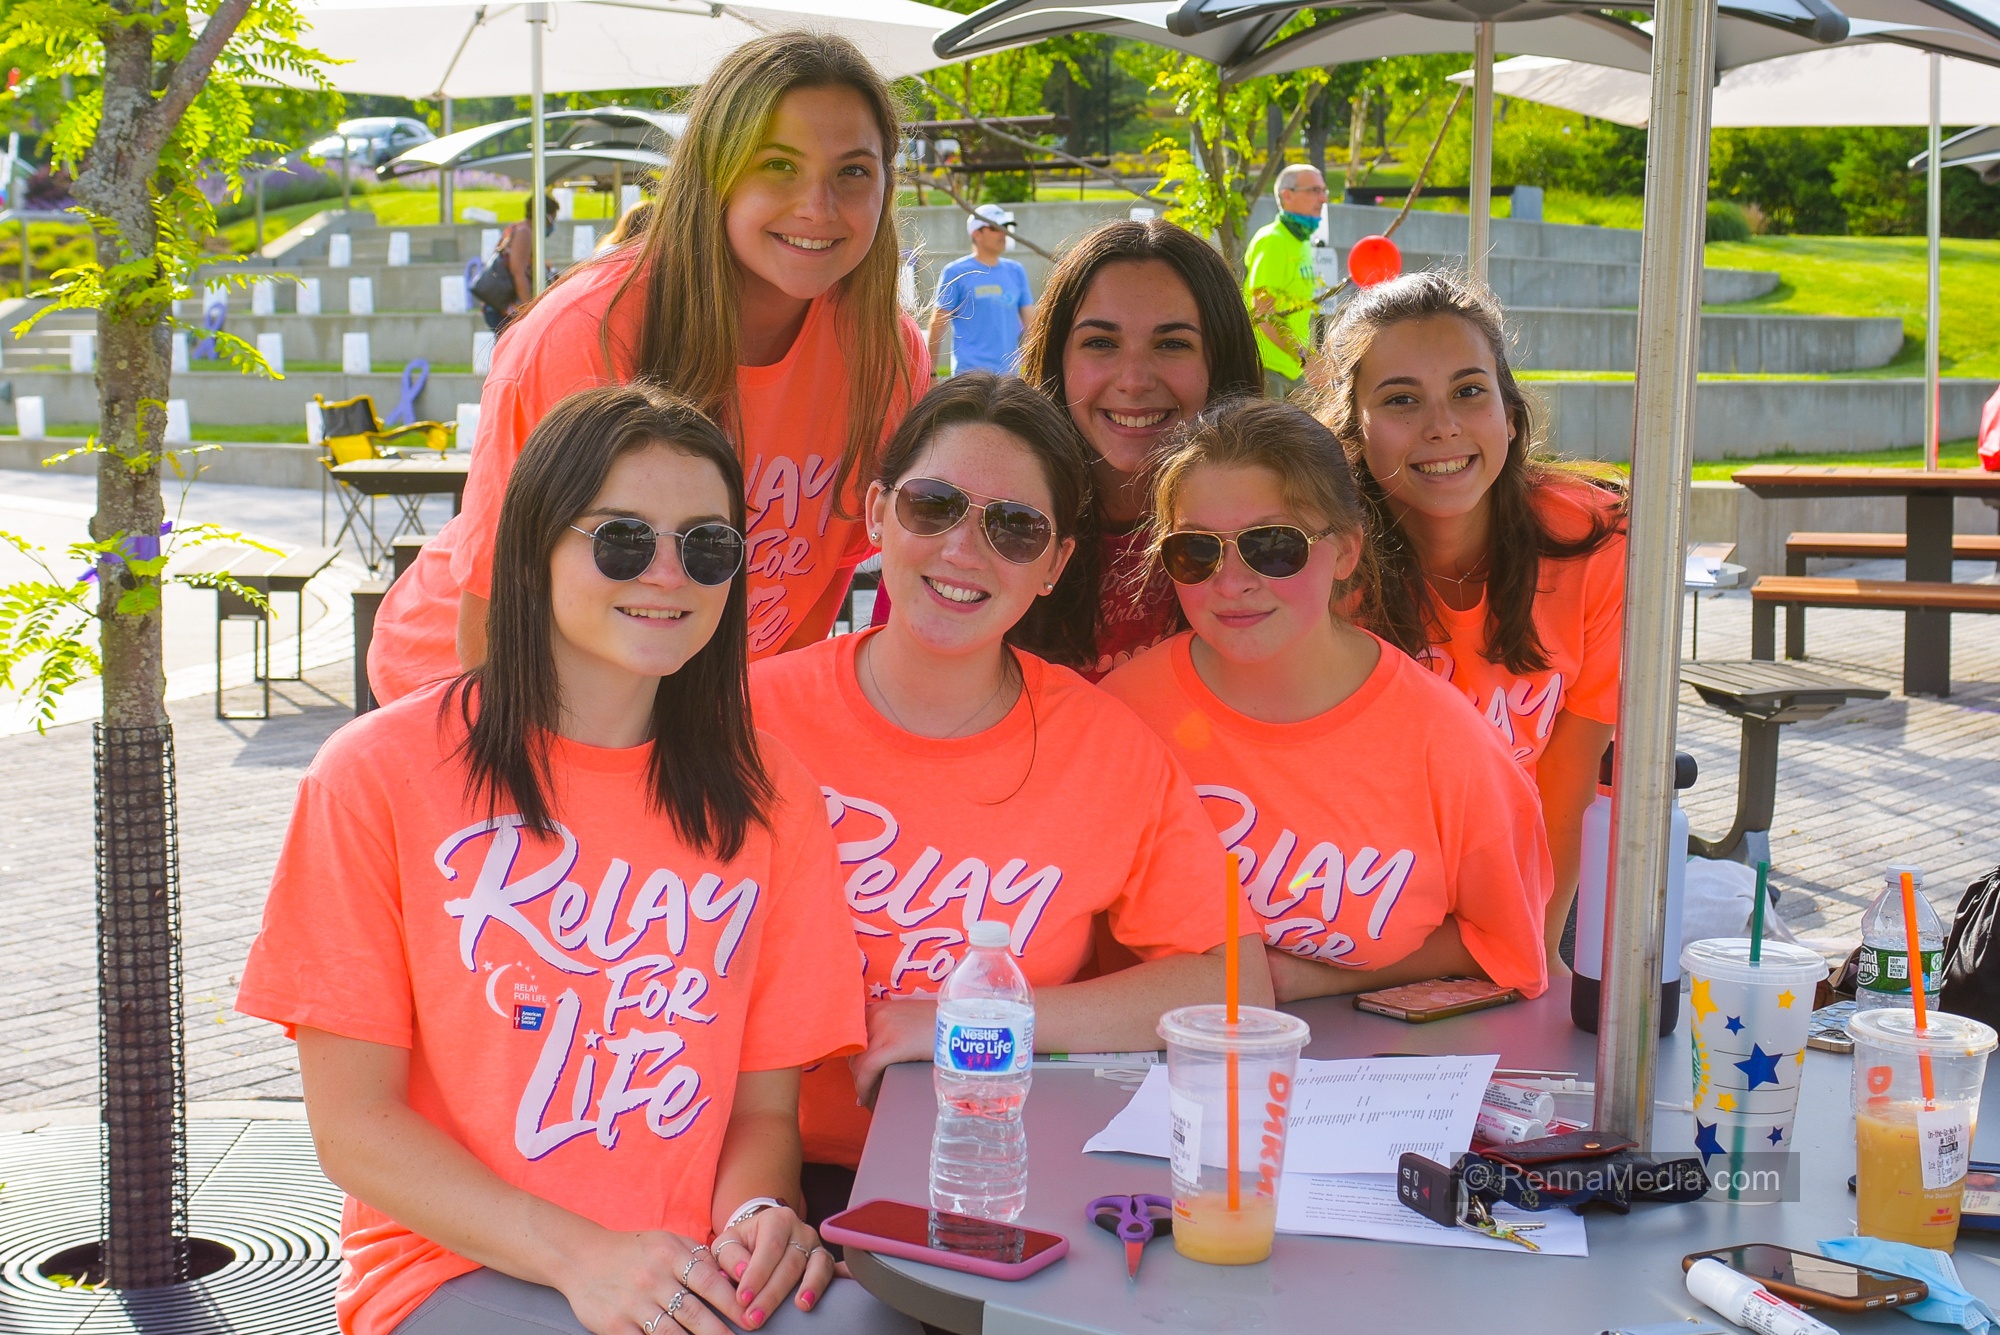 Berkeley Heights Relay for Life “Light the Fight” Event